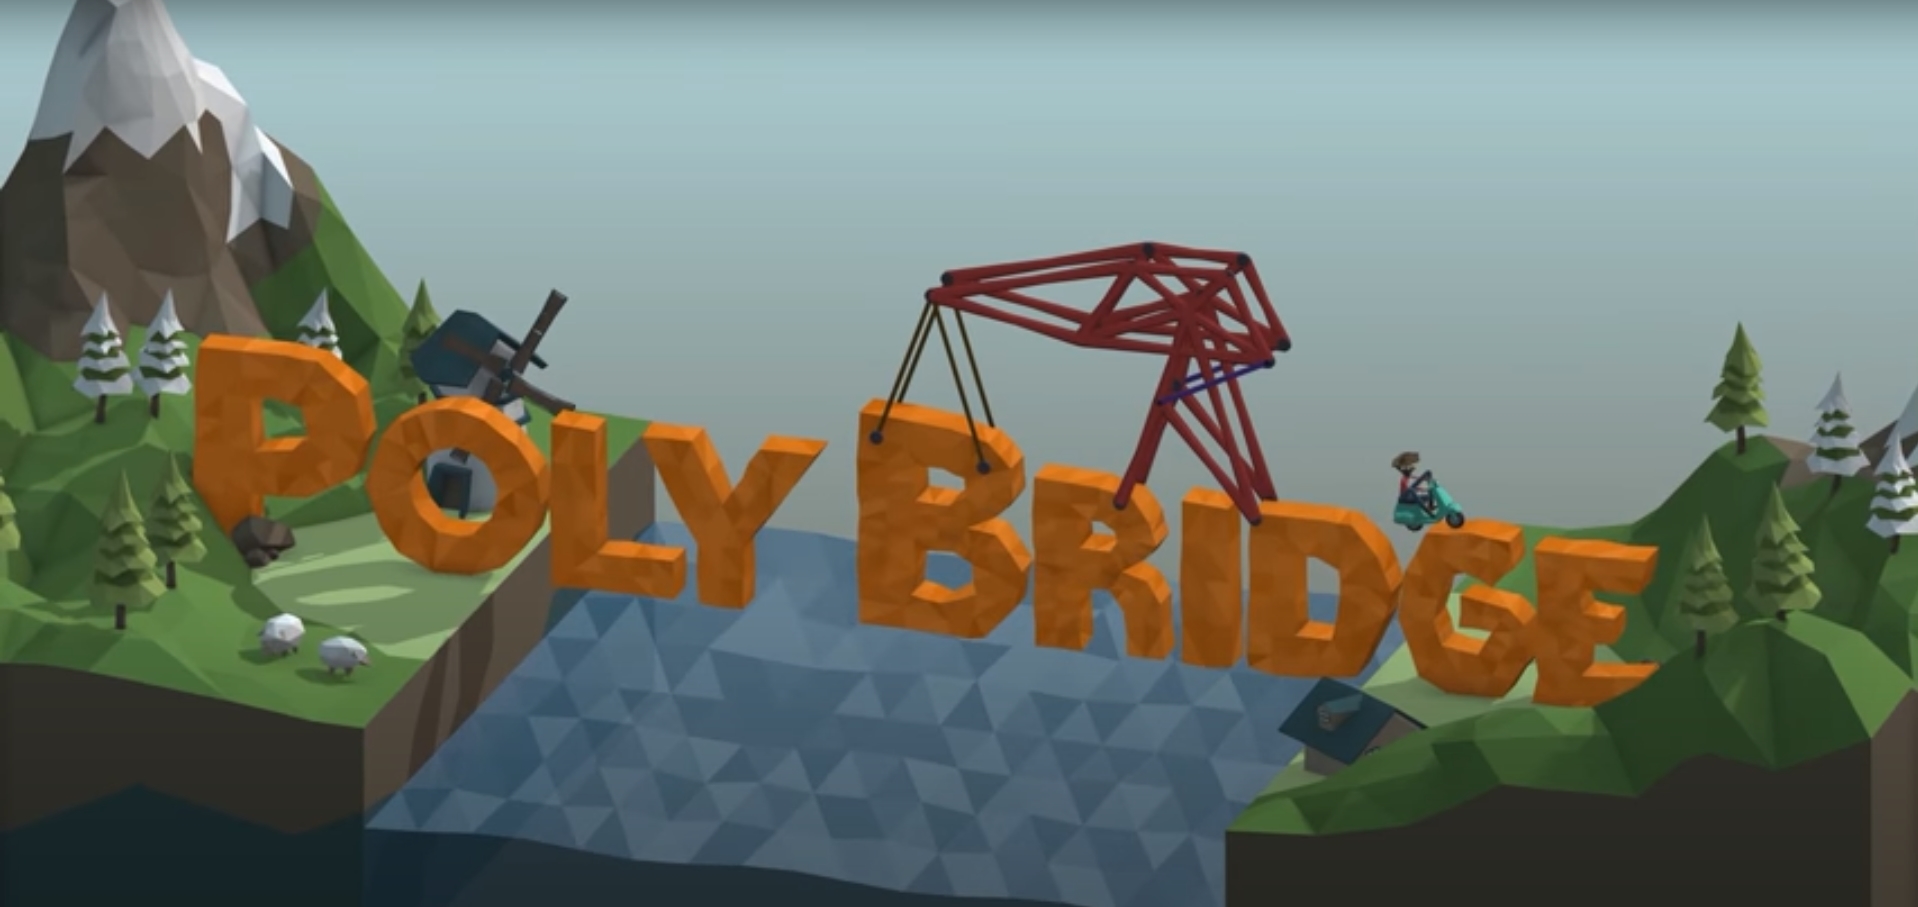 Poly Bridge Developers Reveal Long-Term Plans To Combat Cheaters On Leaderboards